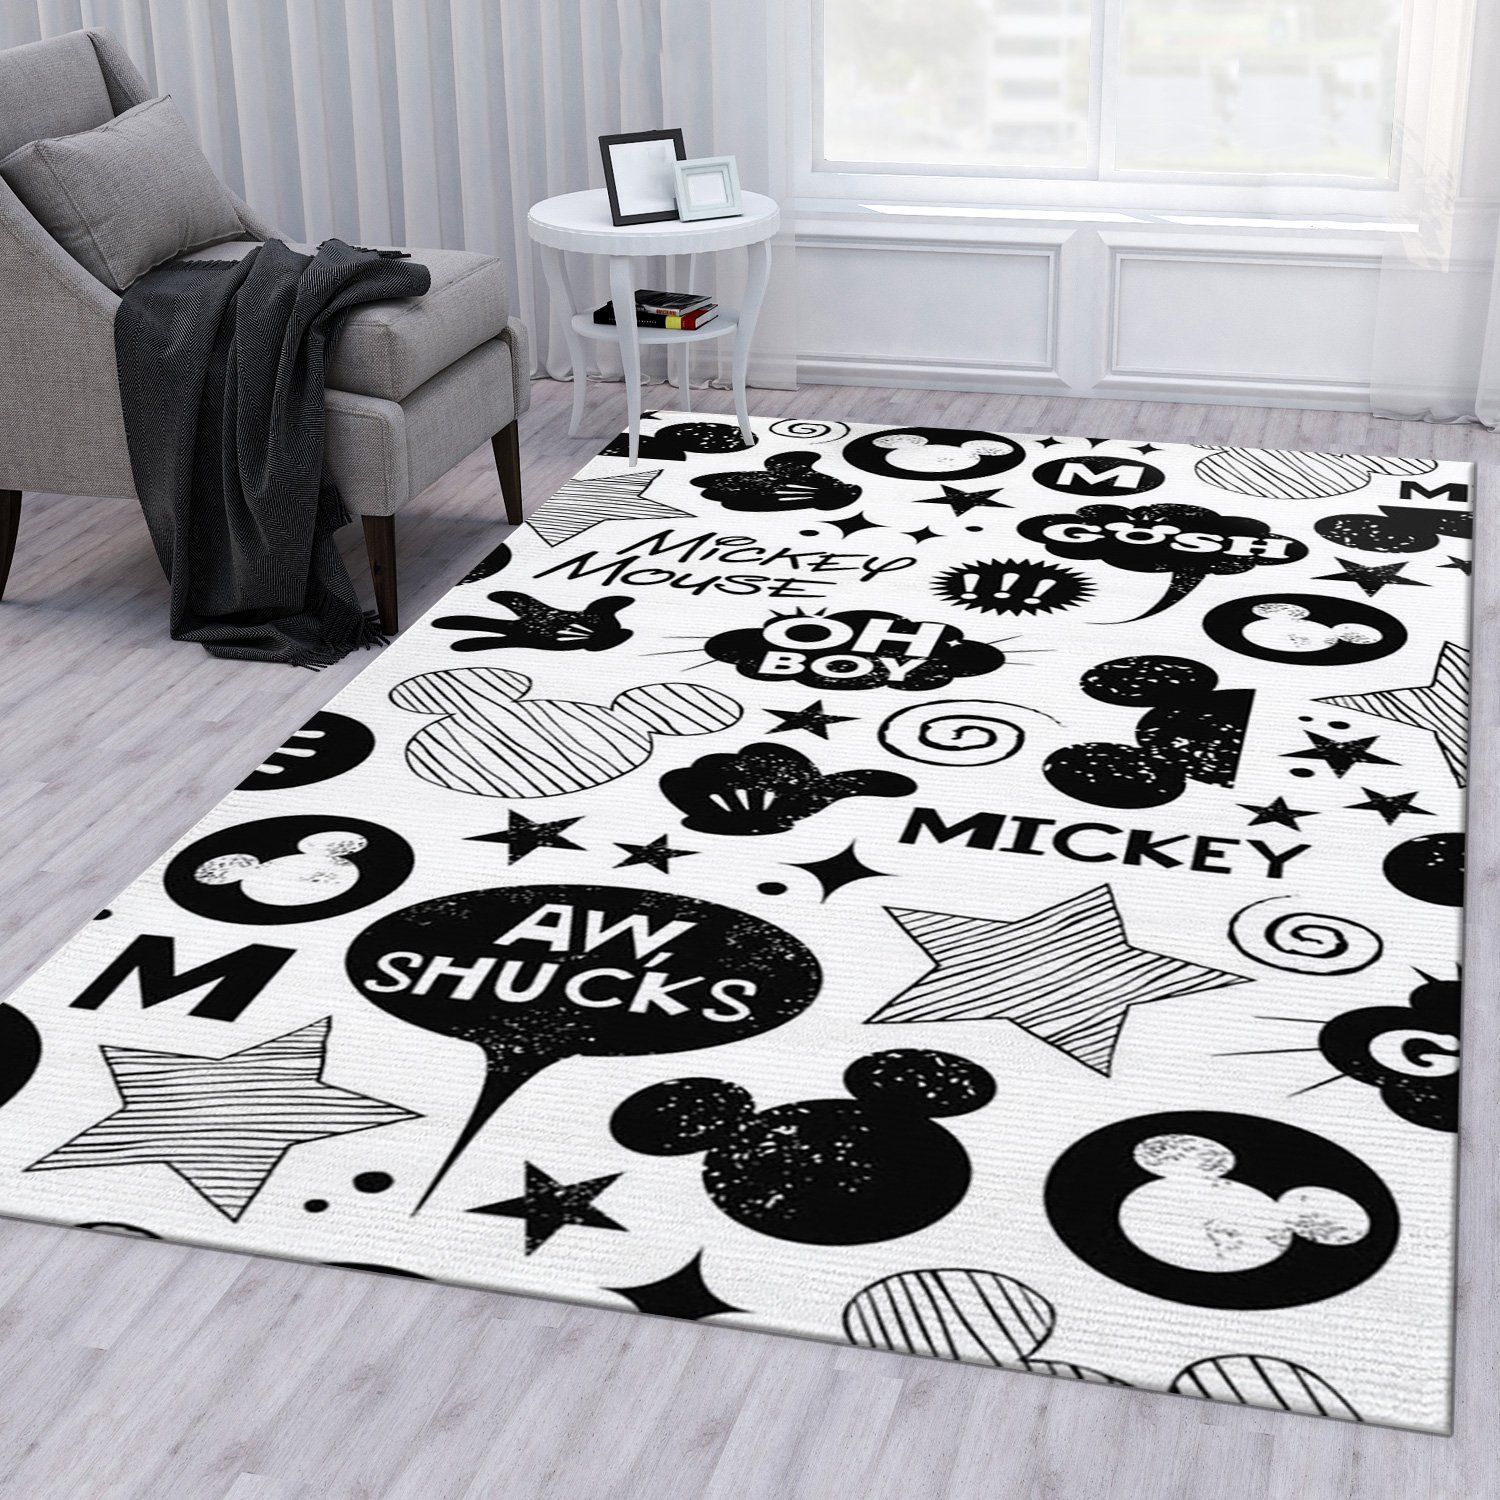 Minnie Mouse Black And White Area Rug For Christmas Living Room Rug Family Gift US Decor - Indoor Outdoor Rugs 1